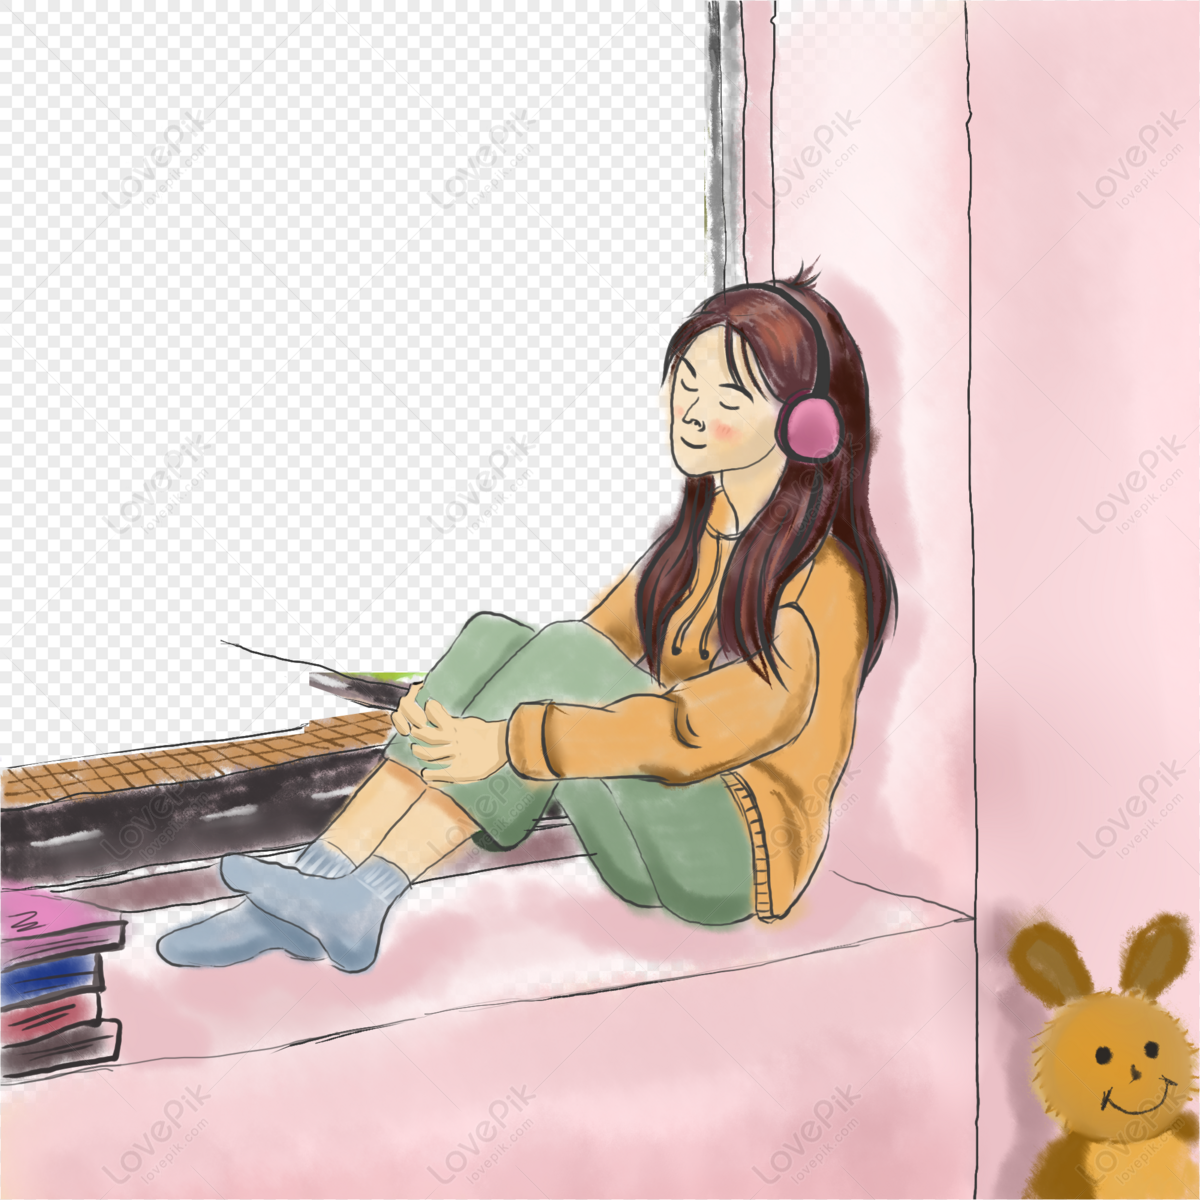 A Girl Listening To Songs By The Windowsill PNG Transparent Image And  Clipart Image For Free Download - Lovepik | 401125107